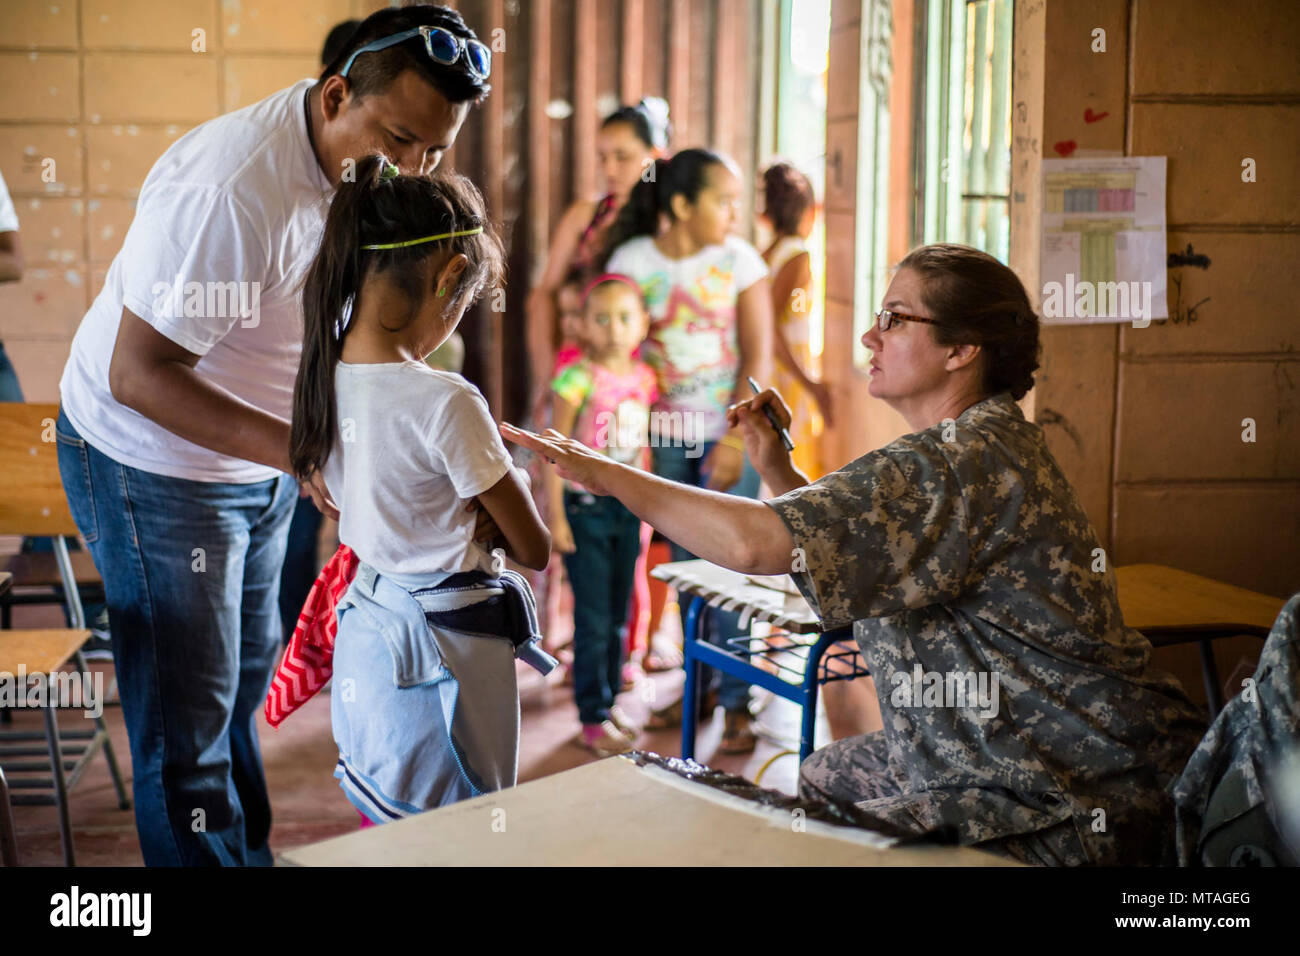 U.S. Army LTC. Rhonda Dyer provides deworming and preventive medication to Hondurans at a Medical Readiness Training Exercise site at Cooperativa village, Colon, Honduras , Apr. 20, 2017. Joint Task Force – Bravo Medical Element, provided care to more than 850 patients during a Medical Readiness Training Exercise in Cooperativa village, Colon, Honduras, Apr. 20-21, 2017. MEDEL also supported a Military Partnership Engagement and assisted more than 650 patients with the Hondurian Navy in Santa Rosa de Aguan, Colon, Honduras, Apr. 22, 2017. Stock Photo